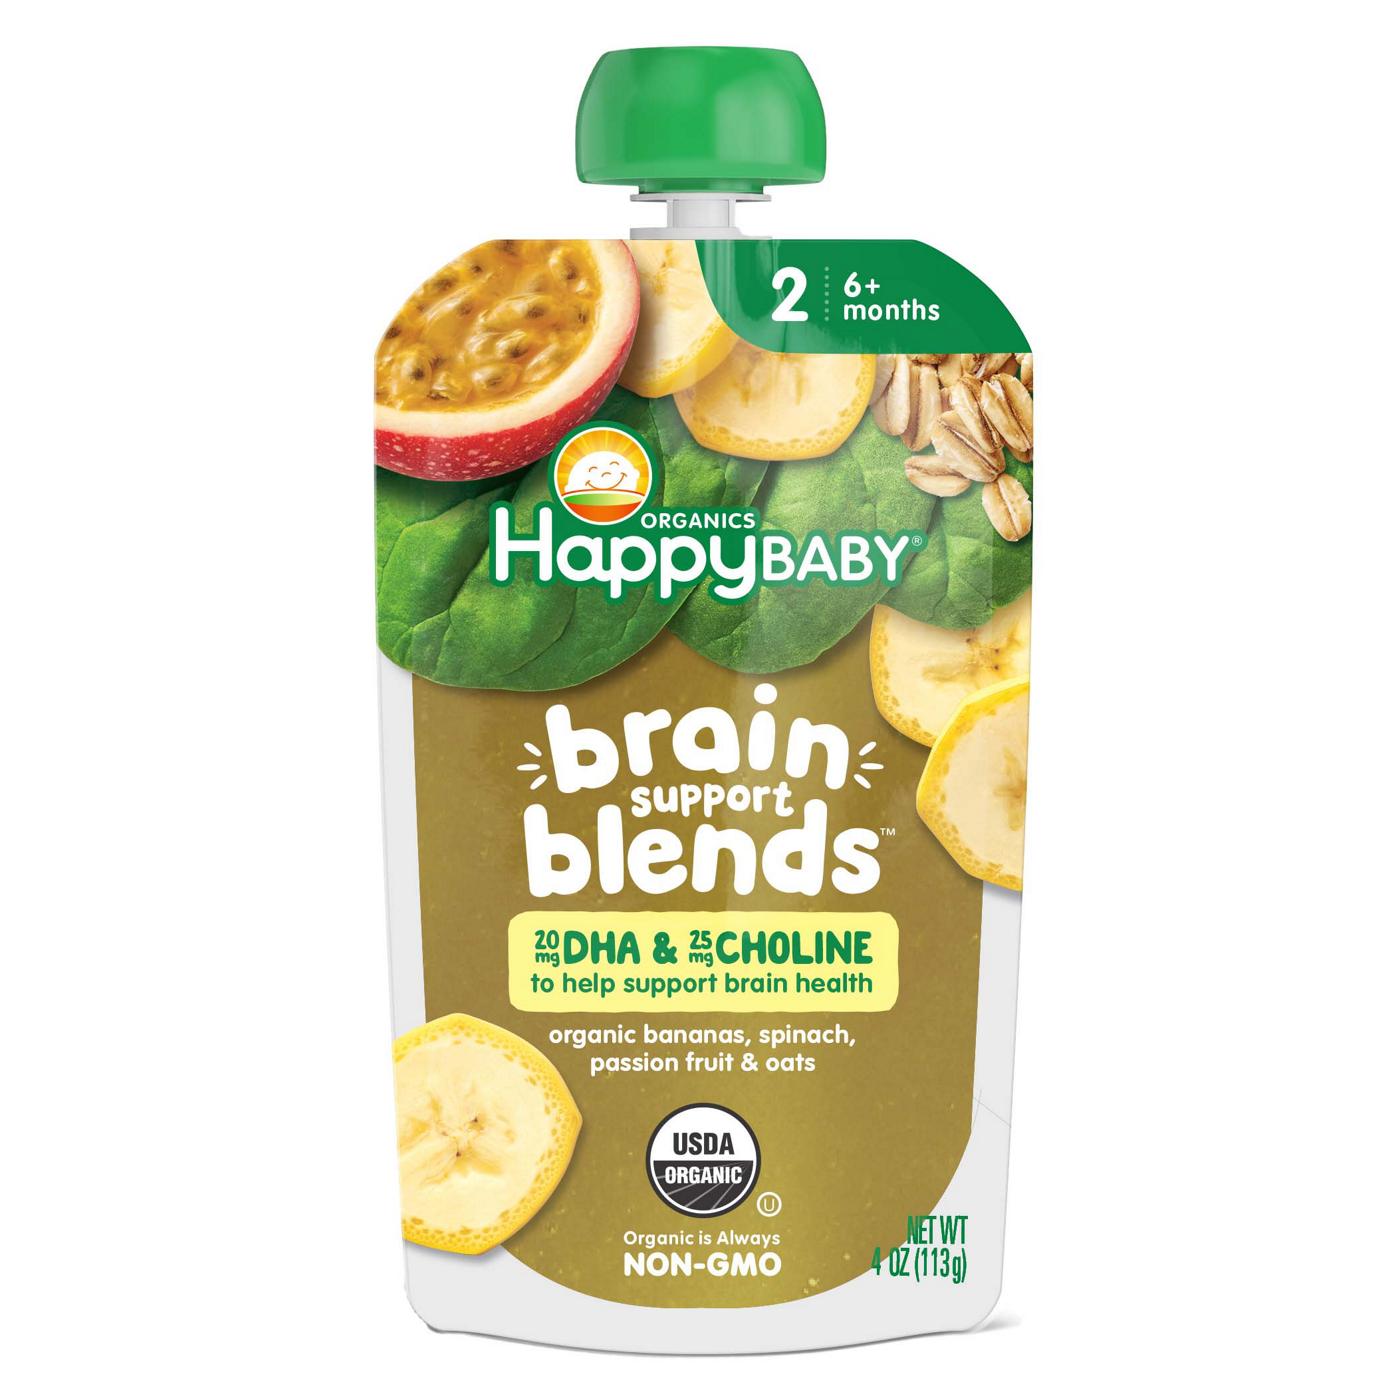 Happy Baby Organics Brain Support Blends Pouch - Bananas Spinach Passion Fruit & Oats; image 1 of 2